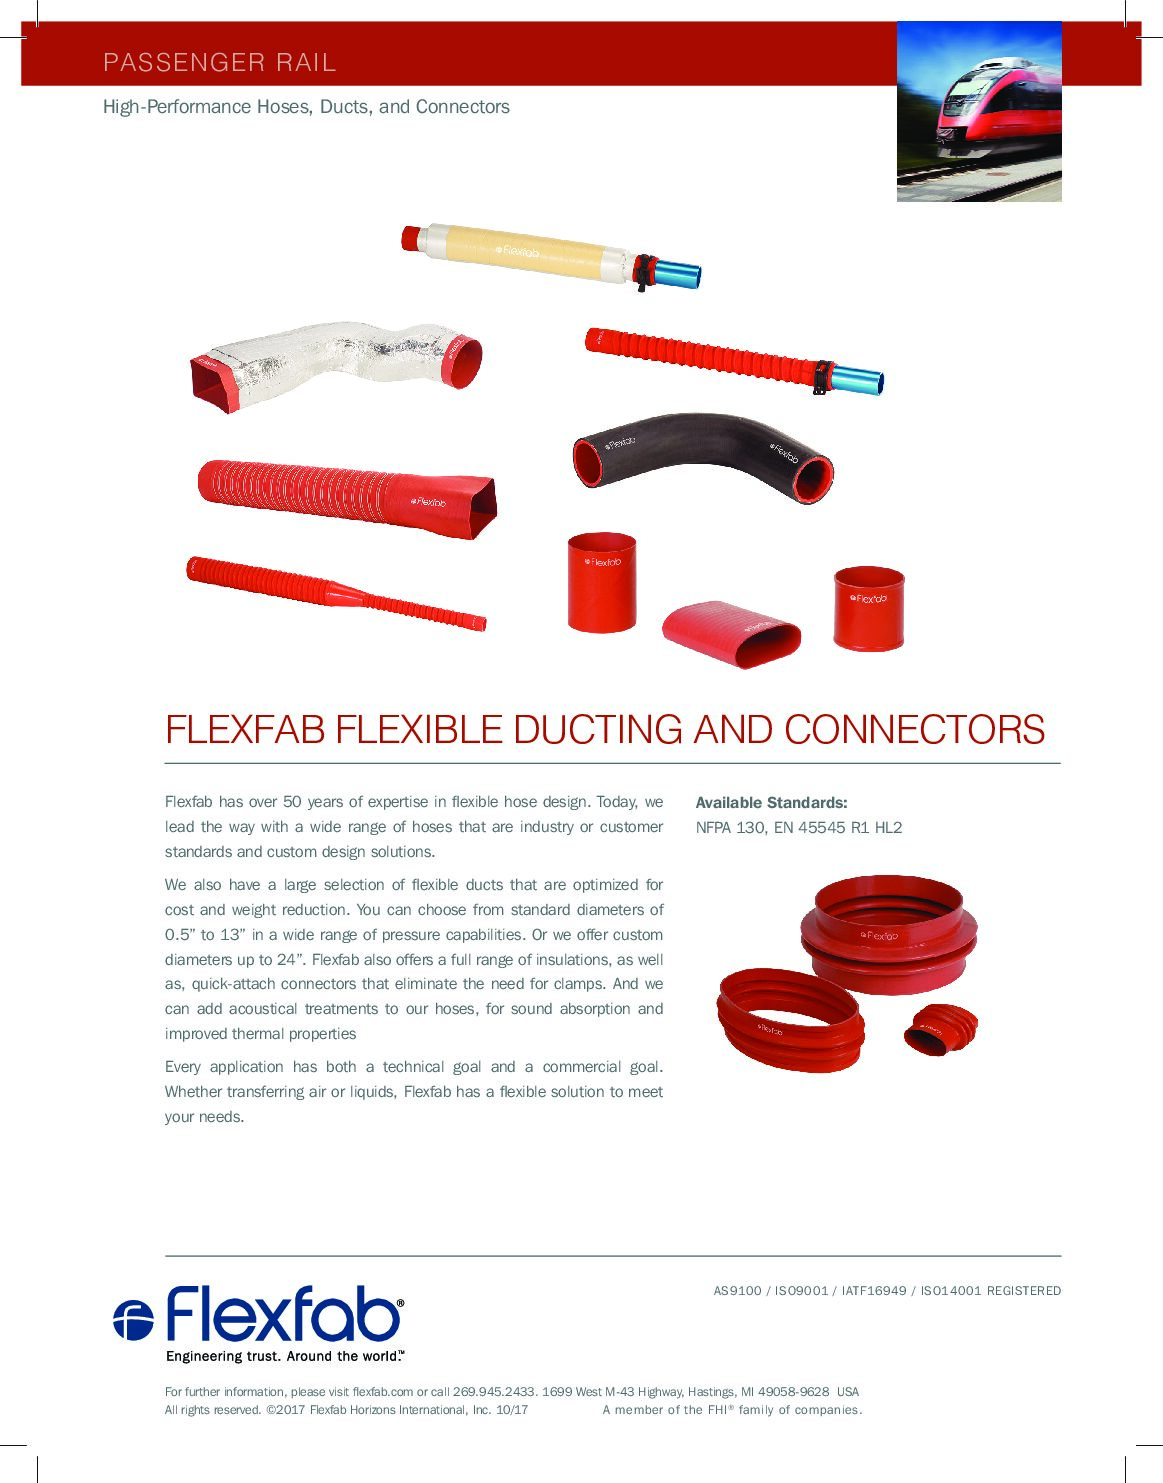 Flexible Ducting and Connectors